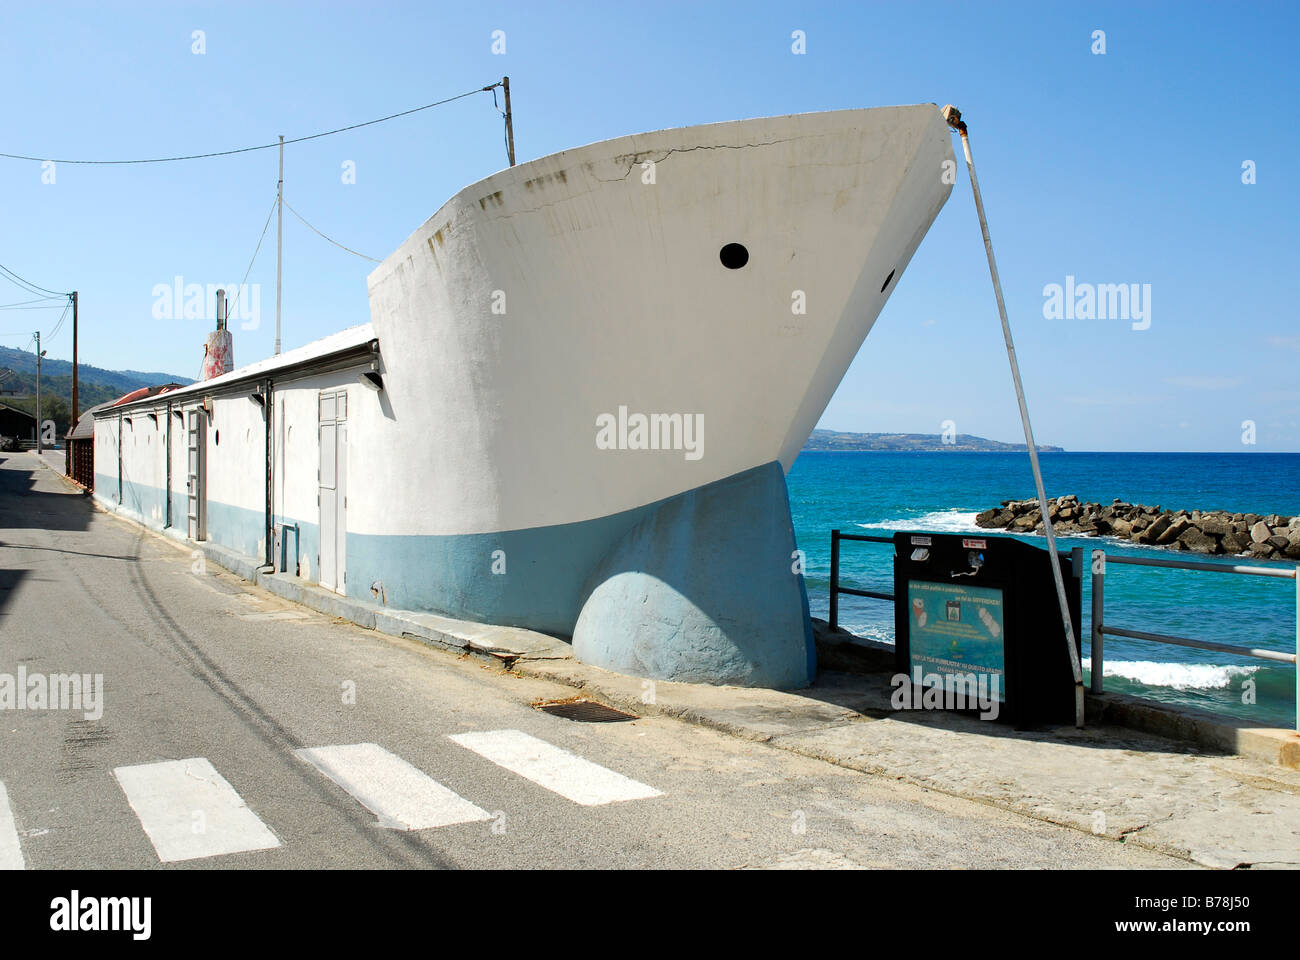 Building in the shape of the bow of a ship, Pizzo, Vibo Valentia, Calabria, Tyrrhenian Sea, South Italy, Italy, Europe Stock Photo